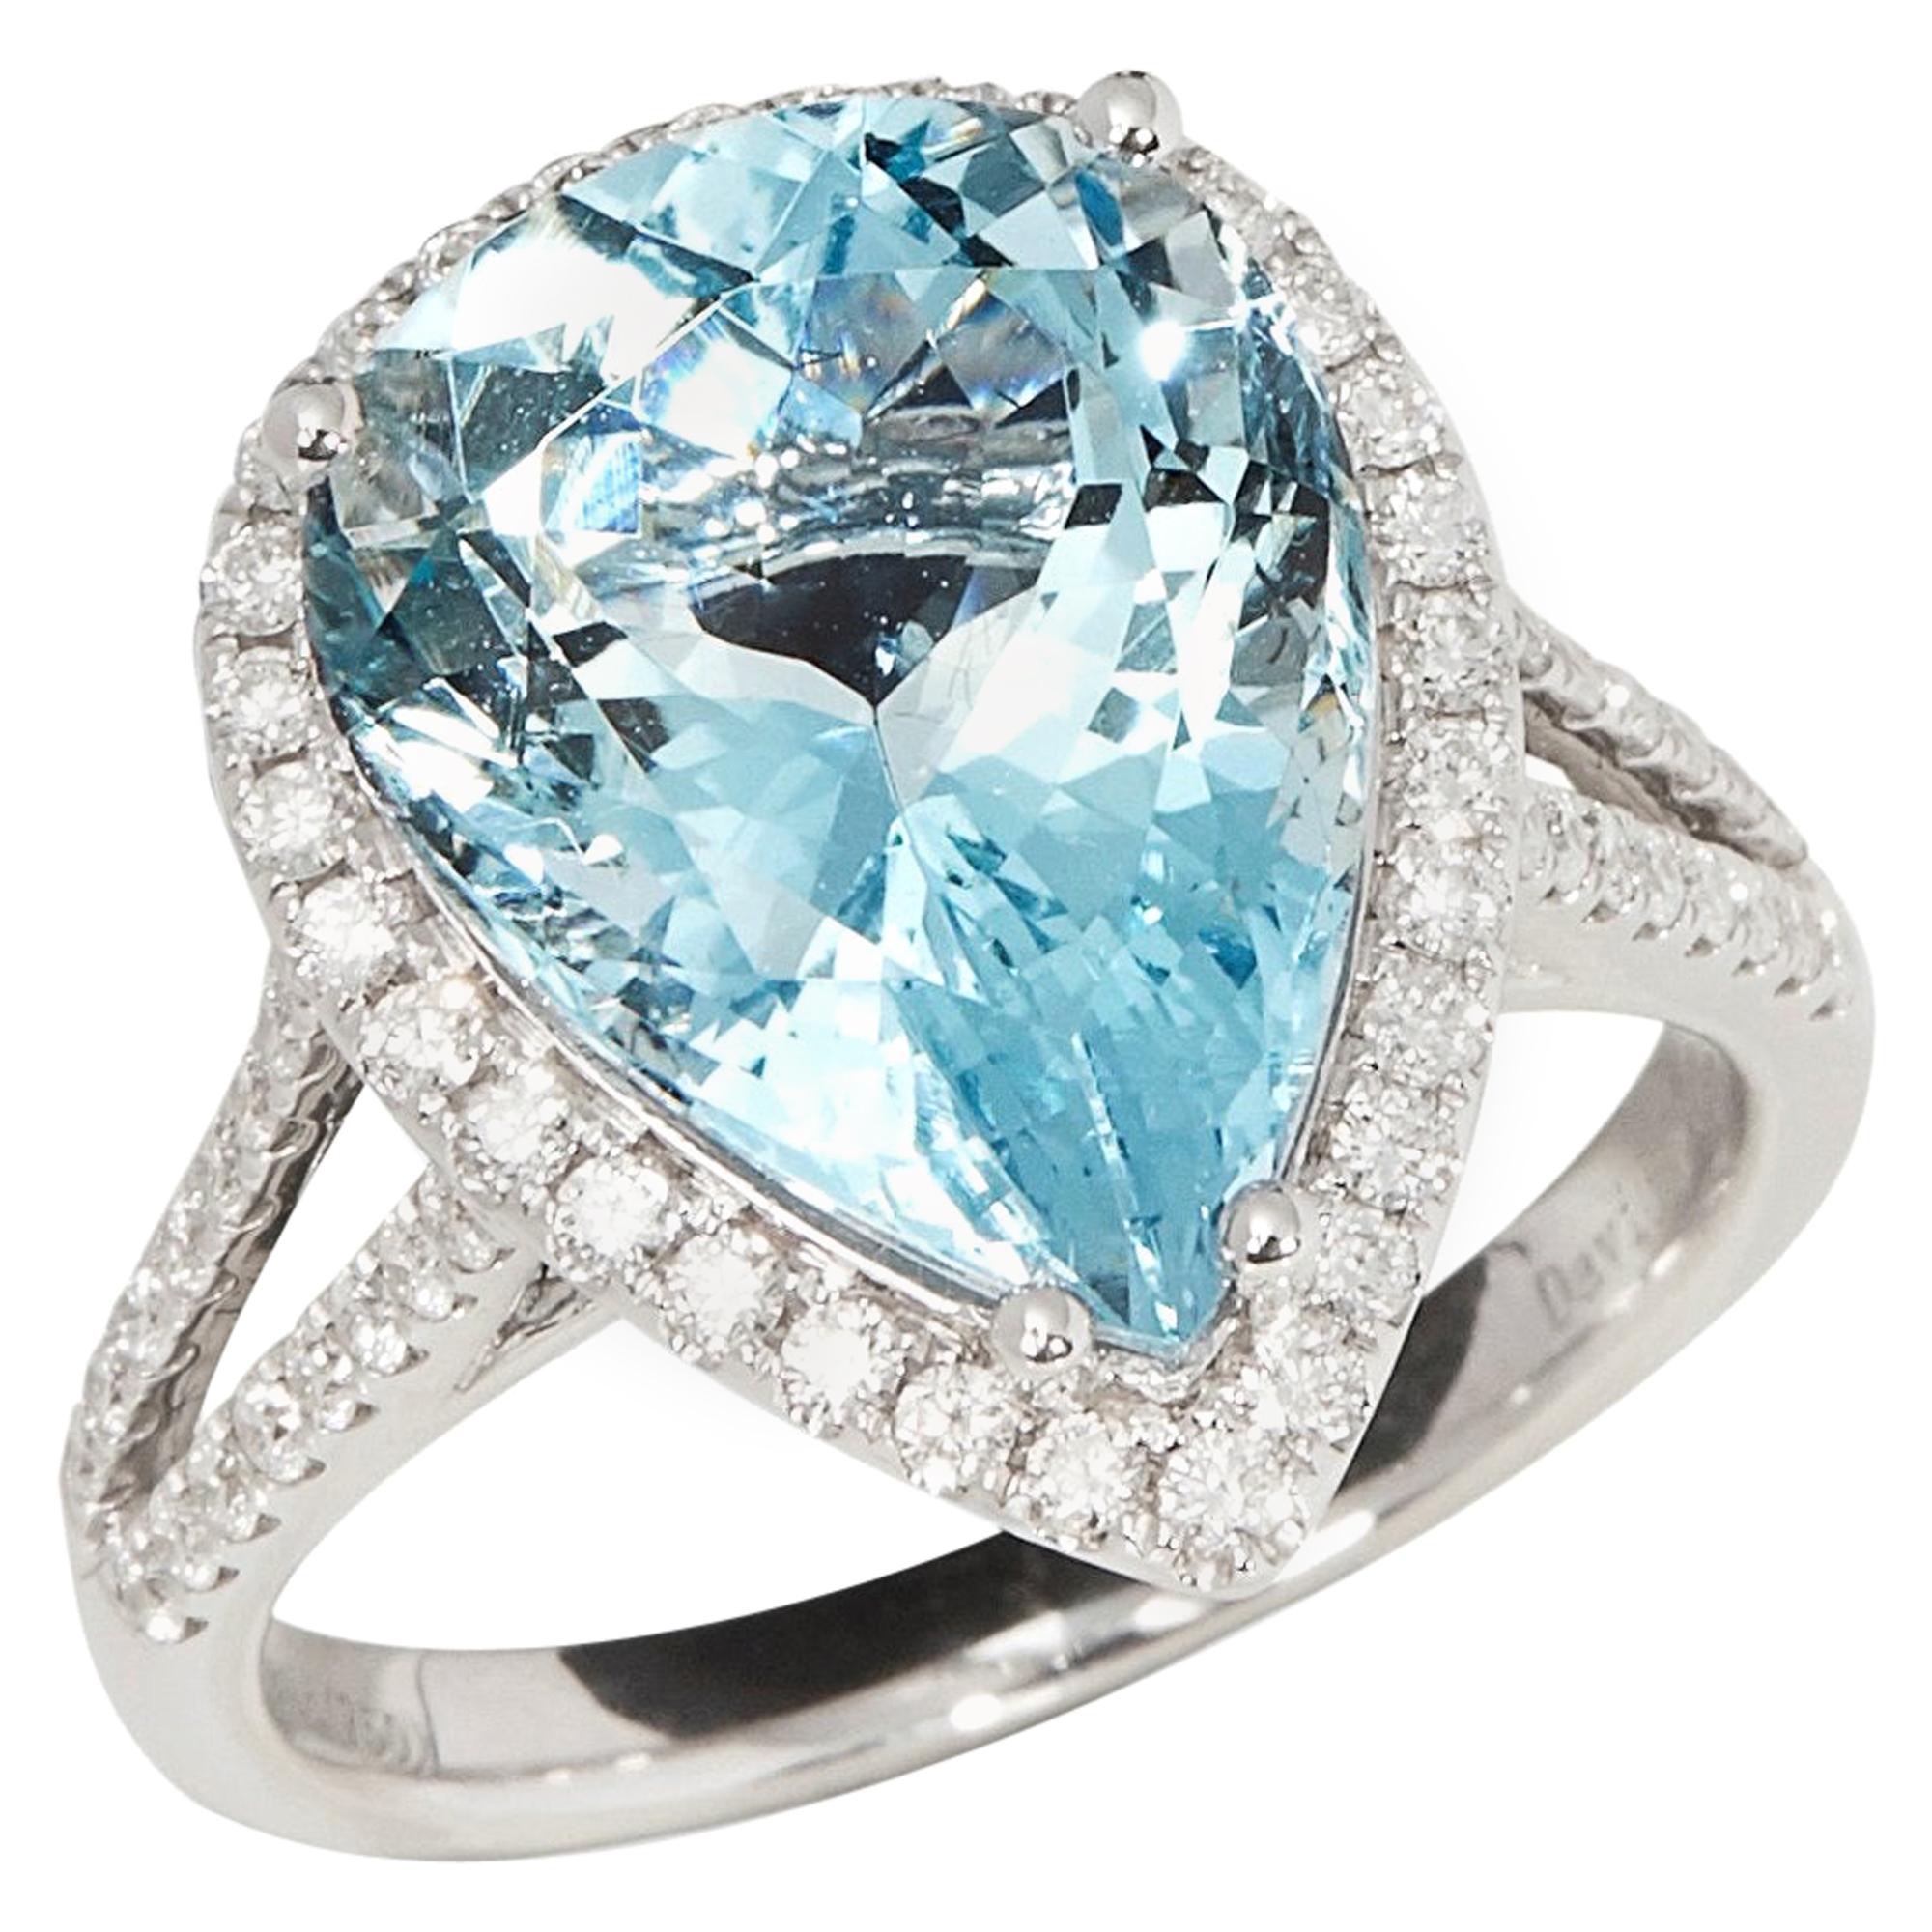 Certified 6.6ct Brazilian Pear Cut Aquamarine and Diamond 18k gold Ring For Sale